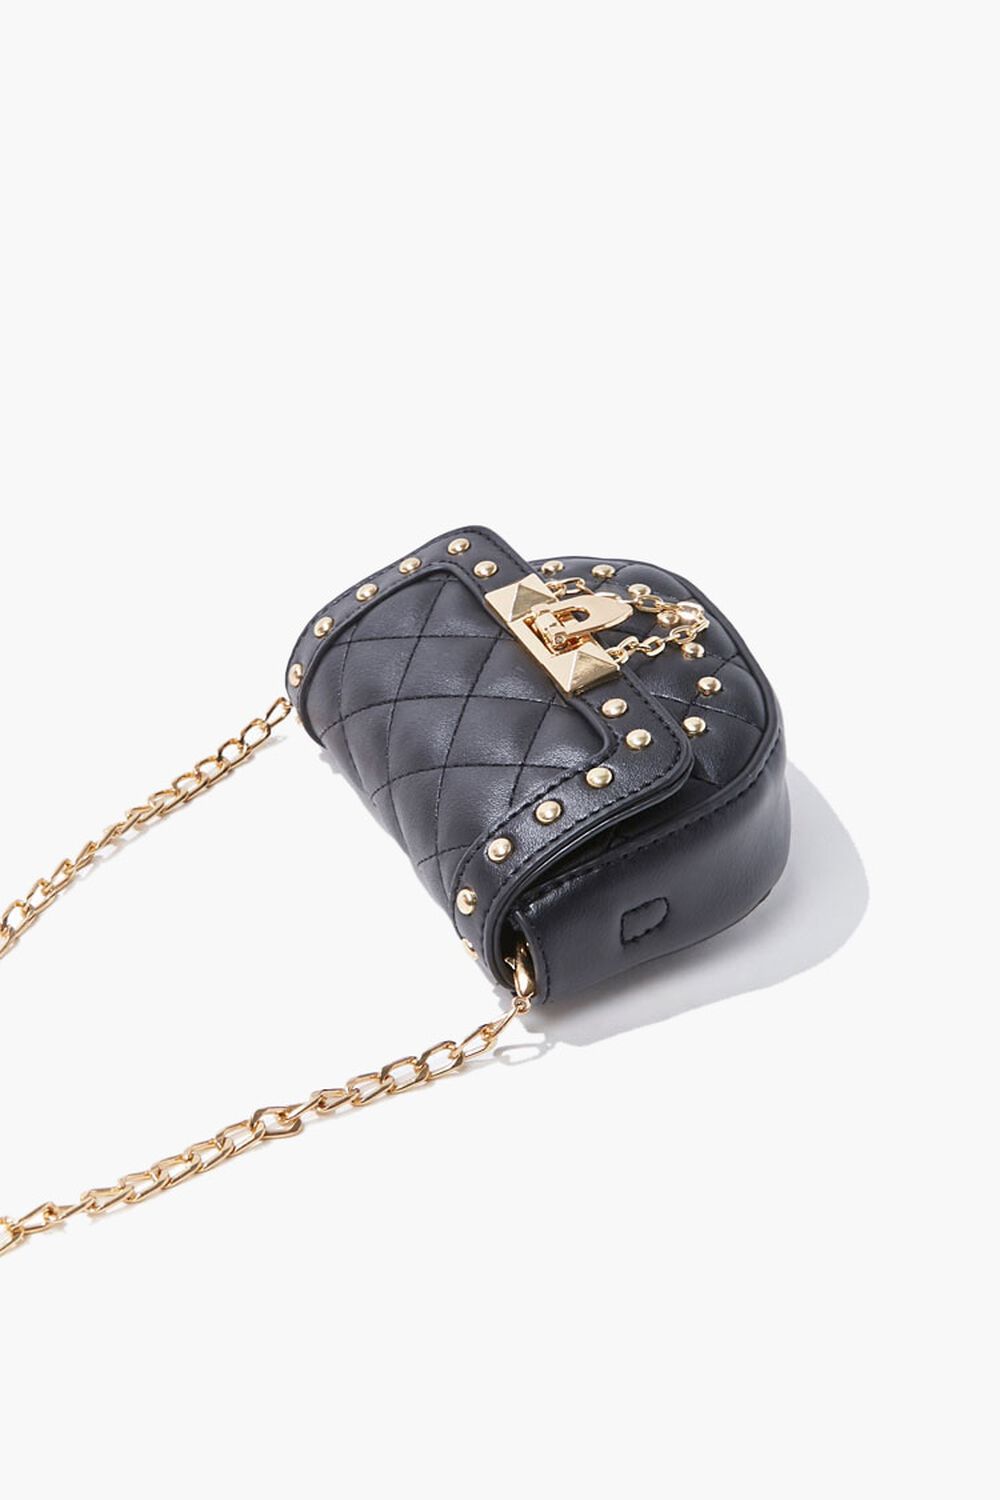 BLACK Studded Quilted Crossbody Bag, image 3